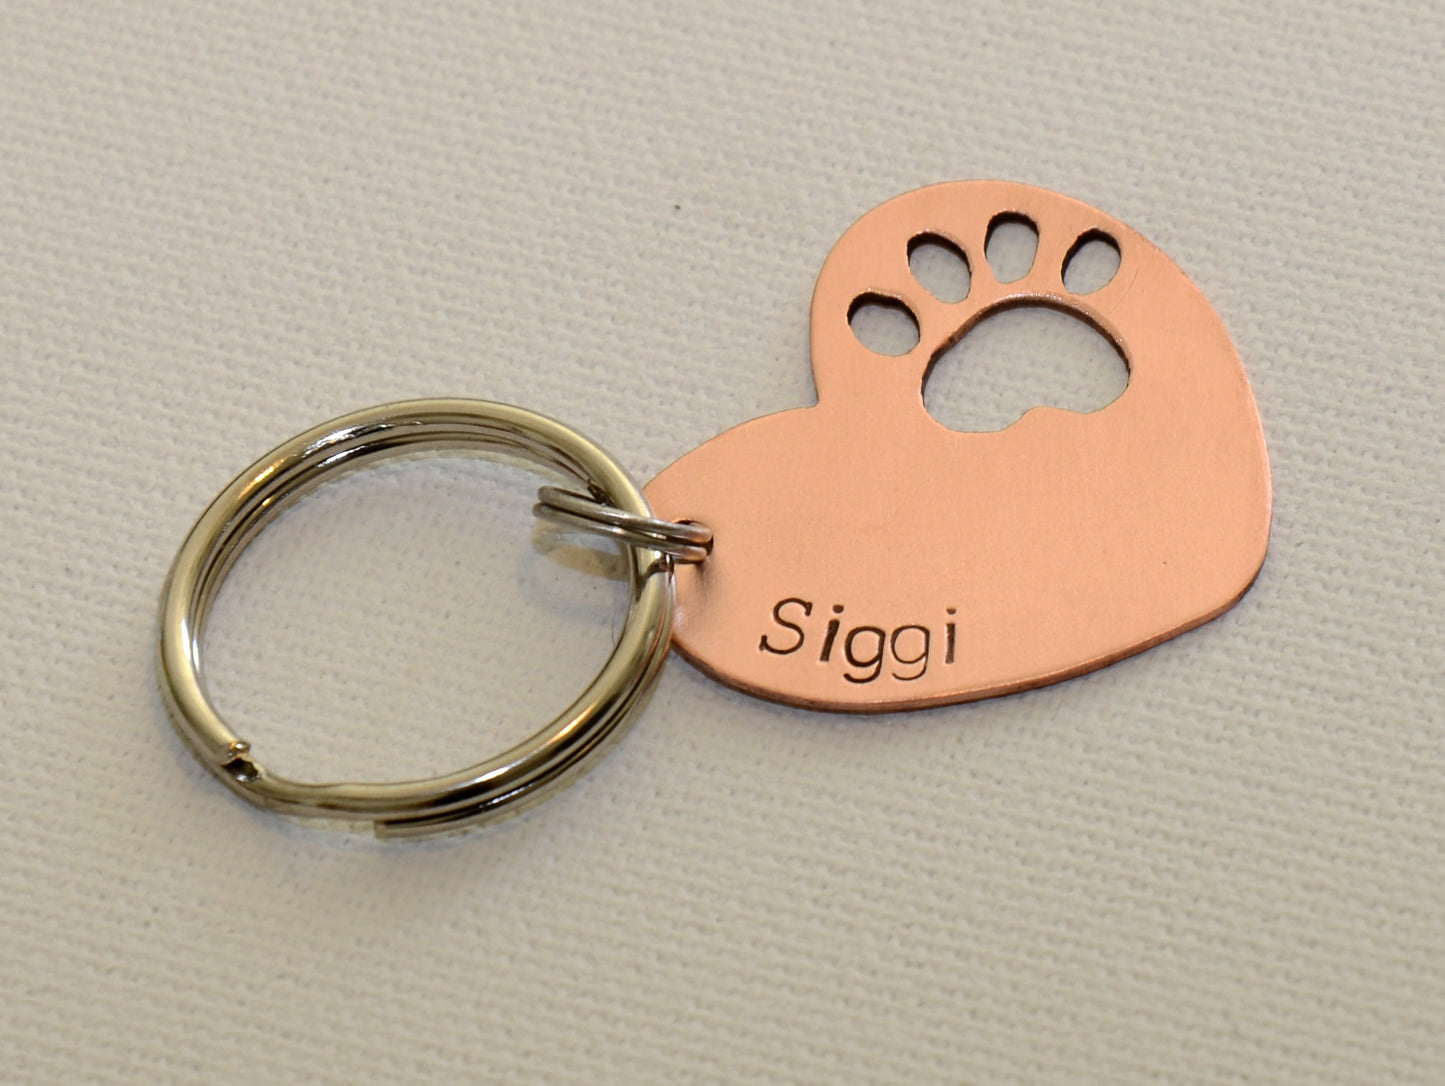 Copper heart shaped dog tag